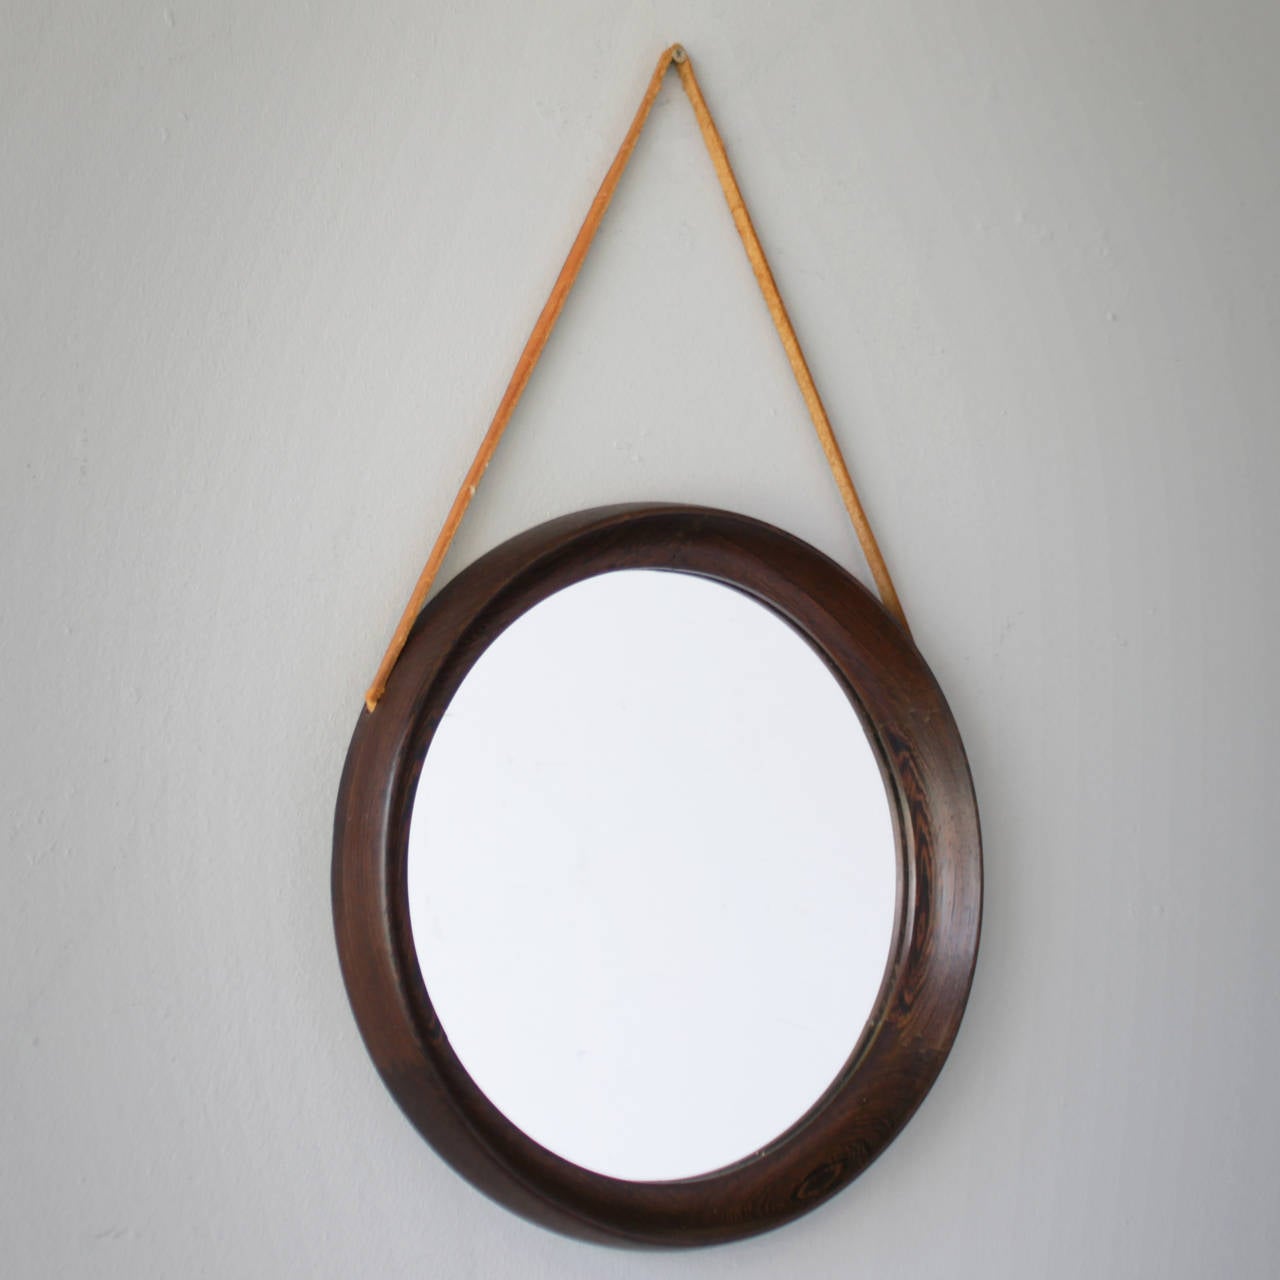 Wenge framed mirror with leather strap, attributed to Uno & Osten Kristiansson. Nice decorative mirror executed in wenge, an exquisite type of wood which is far less common than a teak or rosewood frame.
Good condition except the leather strap,